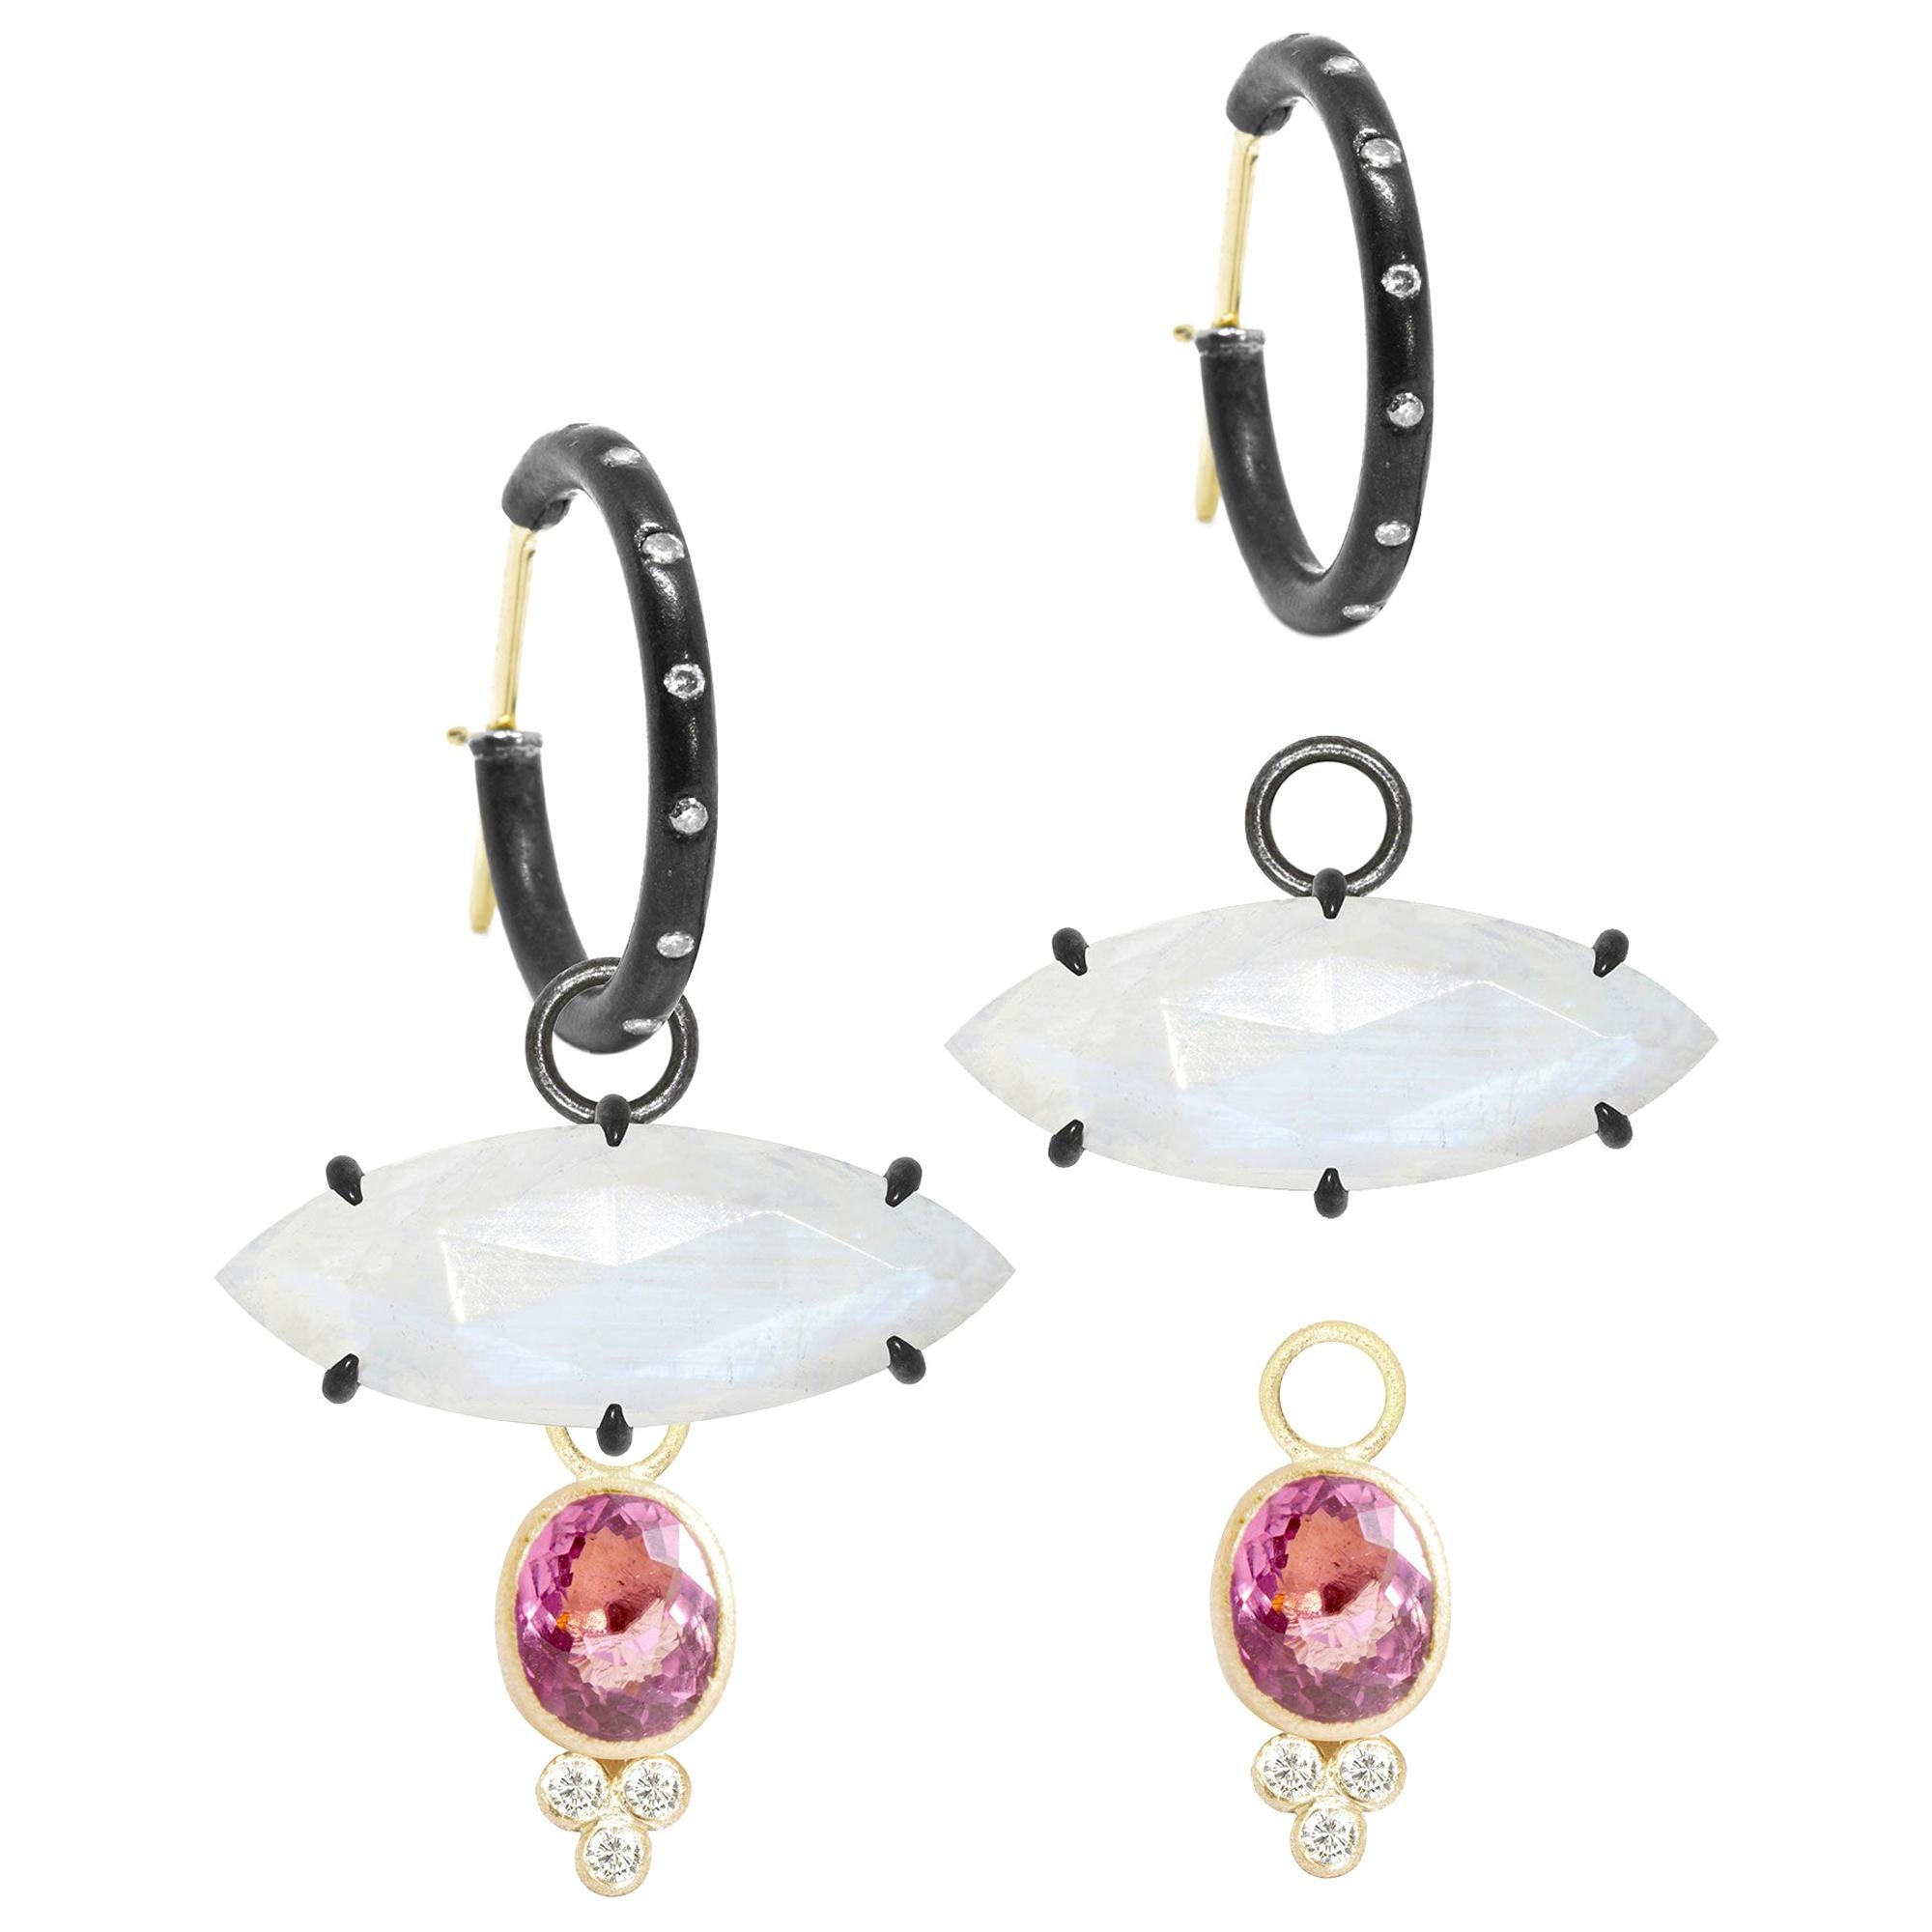 Mekong Med Moonstone Oxidized and Lilly Pink Tourmaline 18 Karat Gold Earrings For Sale